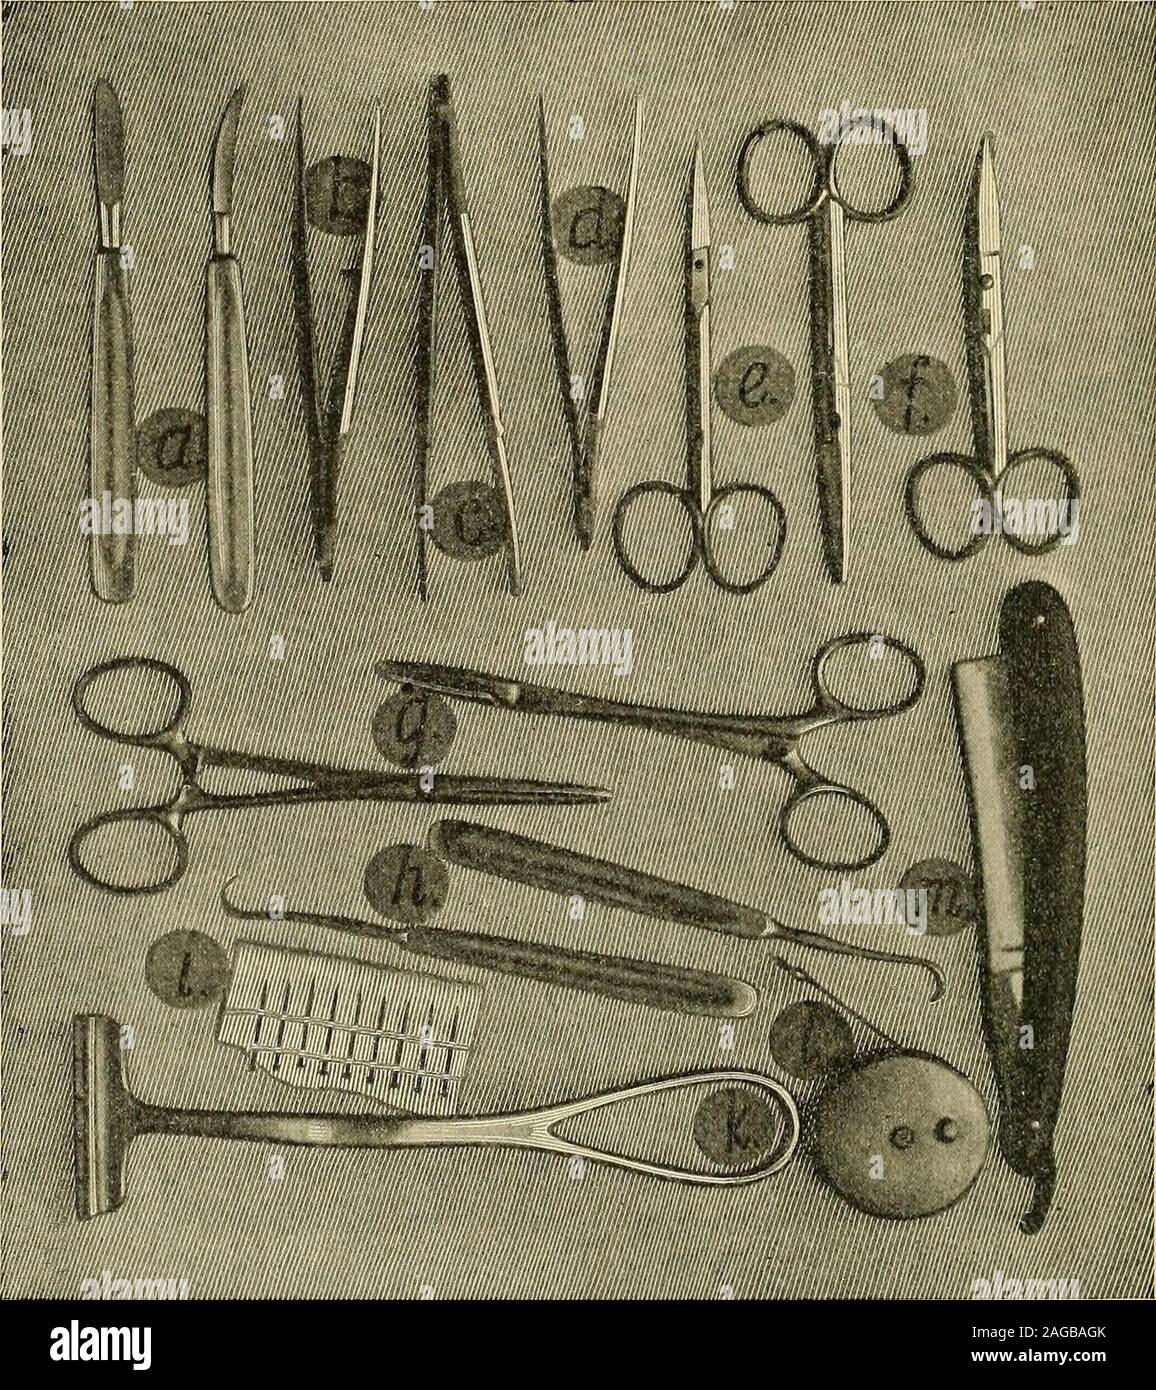 . Operative surgery. Fig. 693.—Pa-per protective,. lIMlLllllllmllllllulllllillllillliiUlii lliii.l illililniil ,1 lIlhiHuiiilllliilui llllllJ 11,11 IIMh M Ml Fig. 693.—Instruments employed in plastic surgery.Small scalpel and bistoury, b. Thumb forceps, c. Thierschs forceps, d. Mouse-tooth forceps, e. Curved sharp-pointed scissors. /. Curved and straight blunt-pointed scissors, g. Forcipressure. h. Tenacula. *. Black pins. k. A McBurneytraction hook. I. Tape measure, m. Razor for cutting skin grafts. PLASTIC SURGERY. 571 If small black pins (i) be inserted to indicate the extent of the flaps,t Stock Photo